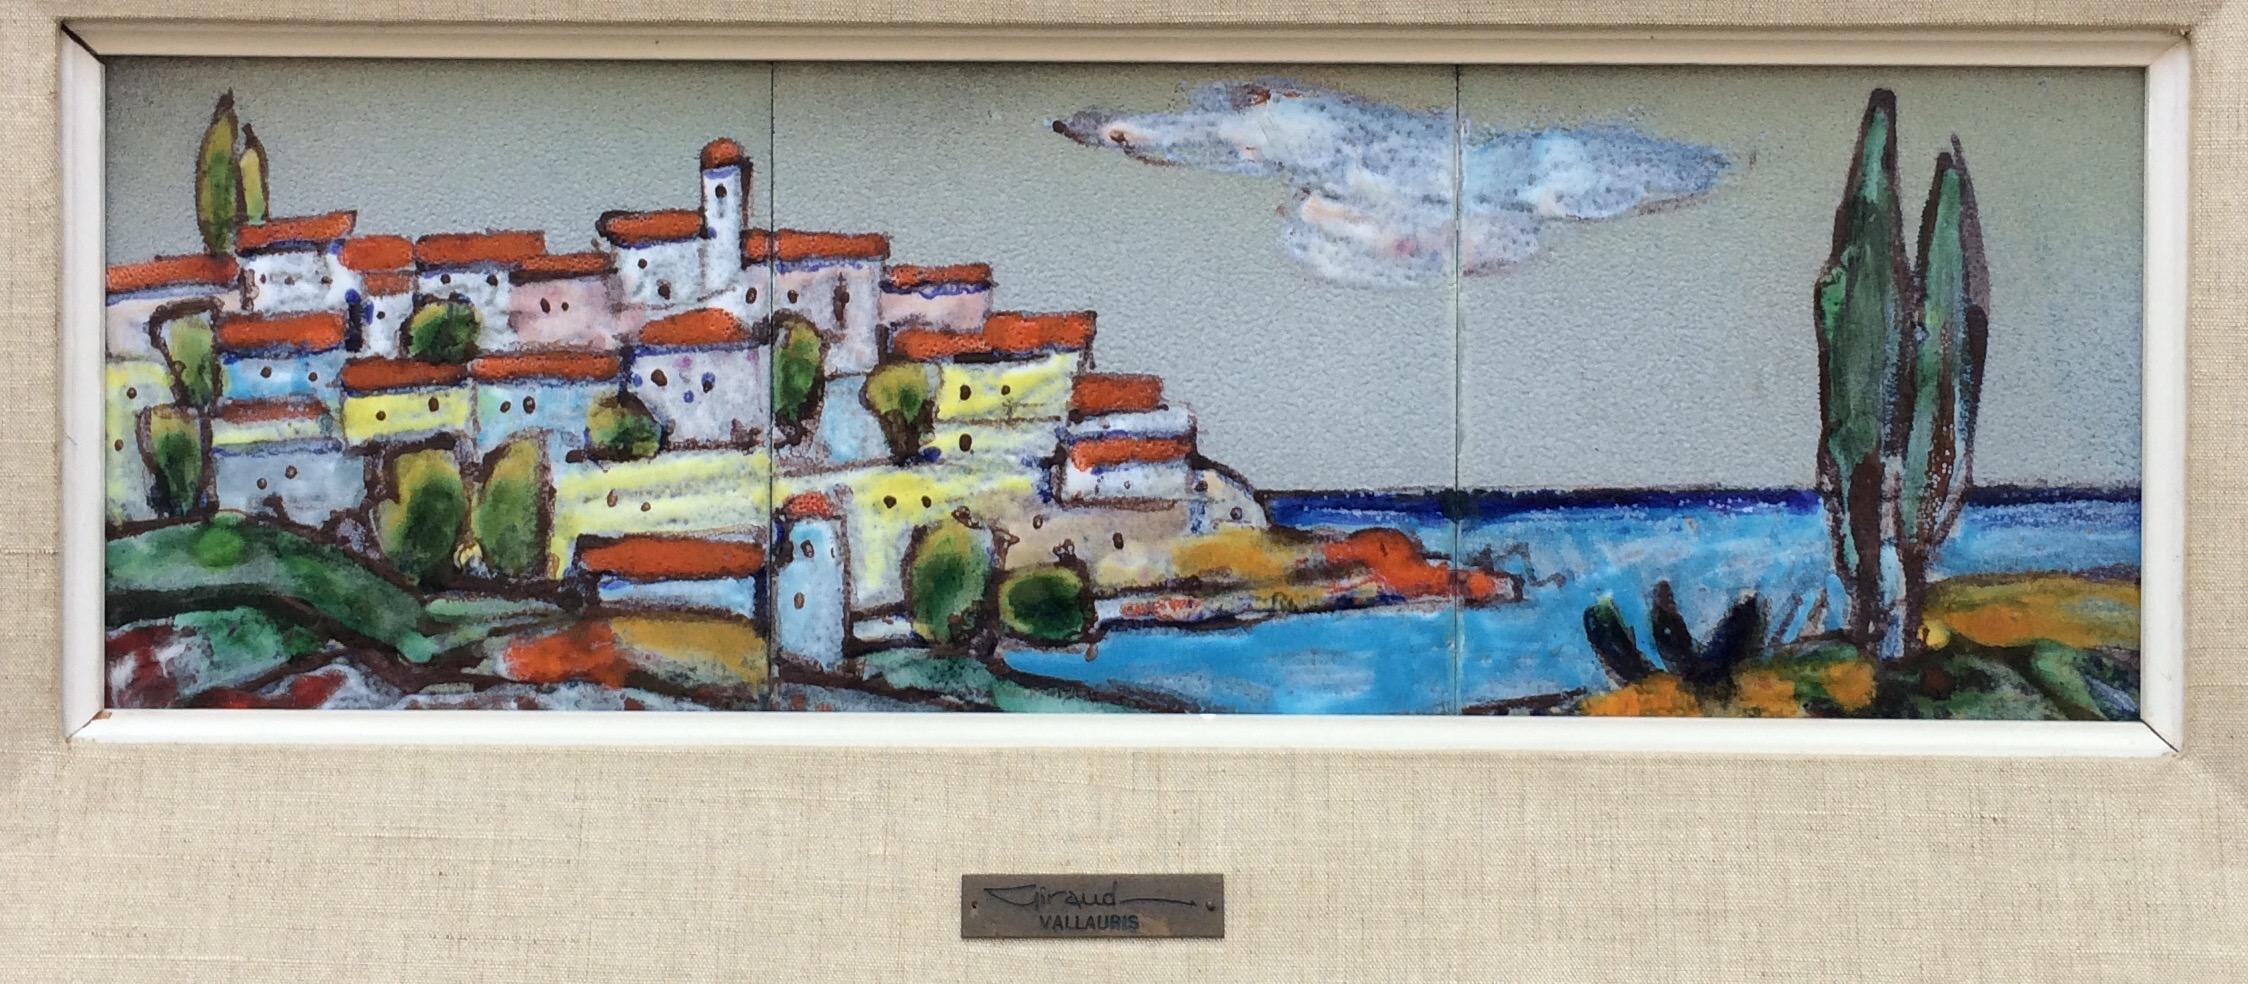 A fine work of art by listed French ceramic artist, Marcel Giraud made of tiles depicting a Mediterranean village overlooking the sea, in various shades of blue, beige, orange and other accentuating colors. Stunning details.

This framed wall